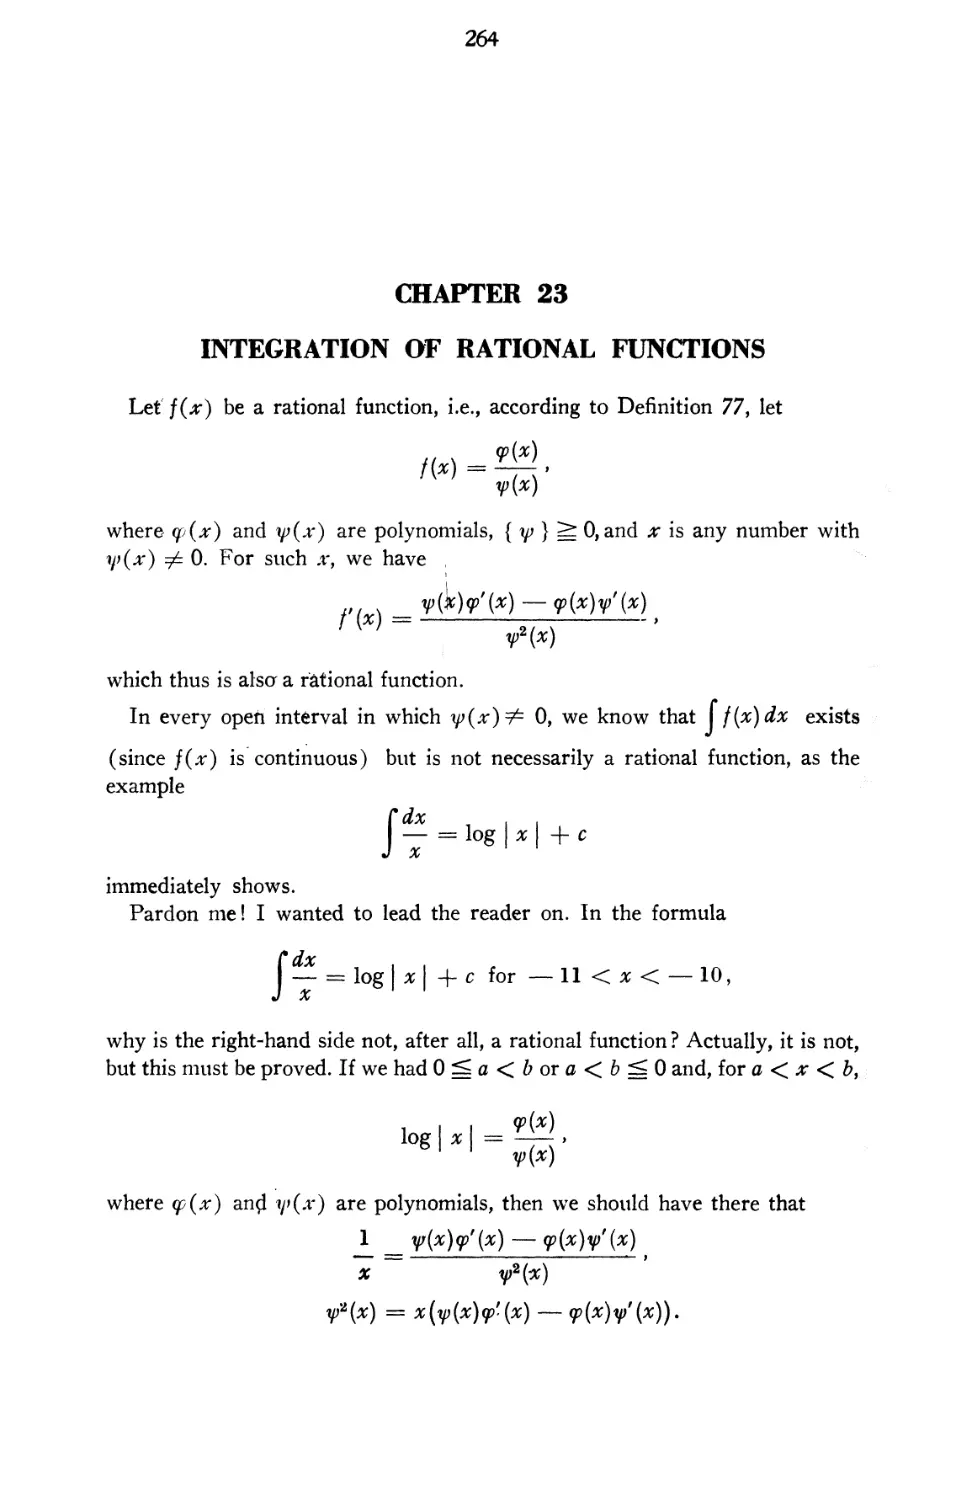 Chapter 23 The Integration of Rational Functions